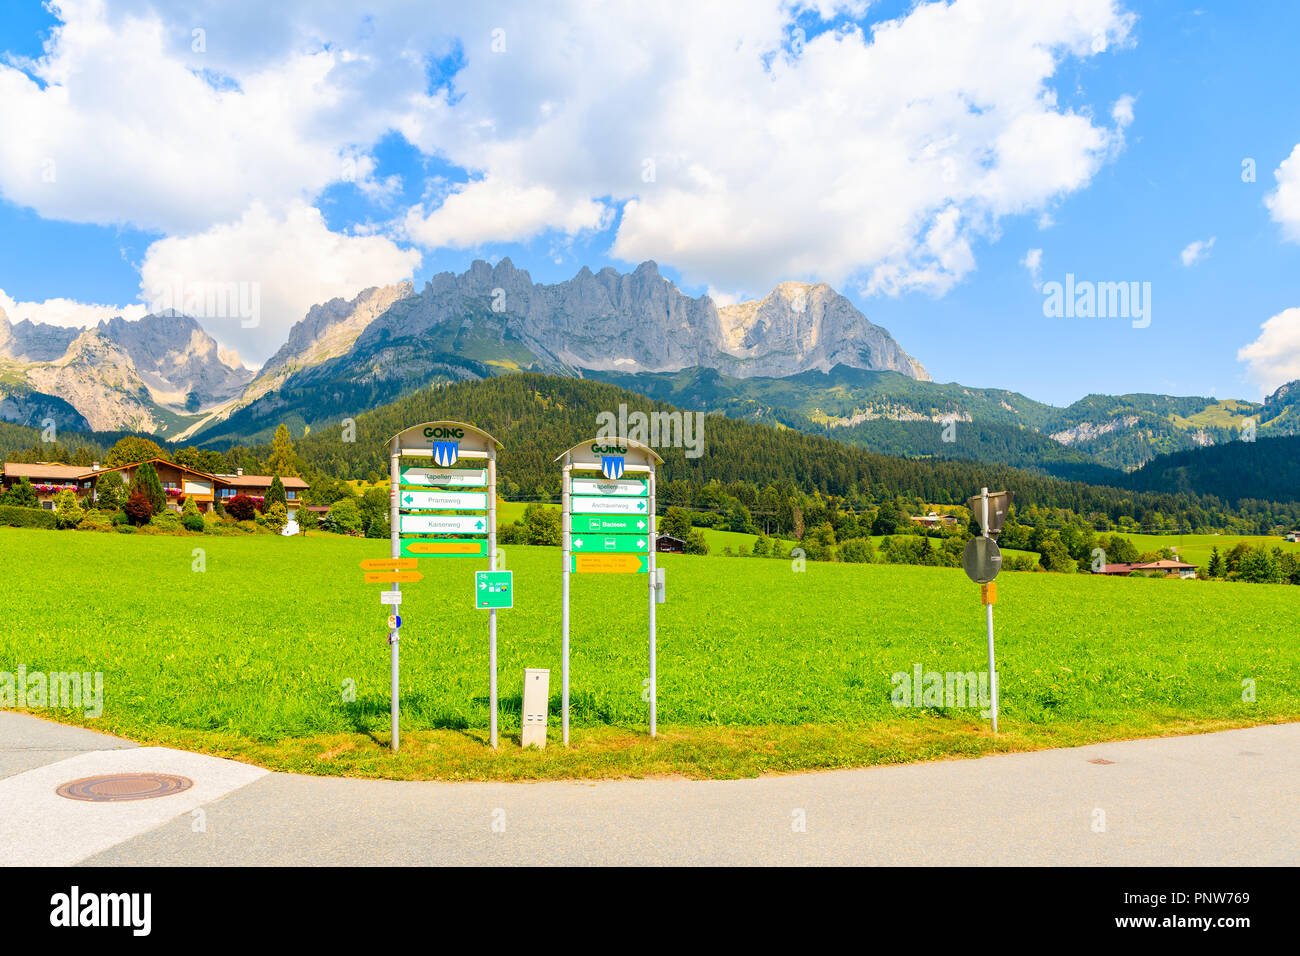 TYROL, AUSTRIA - JUL 29, 2018: Walking and cycling signs on road in Going am Wilden Kaiser mountain village on sunny summer day. This place is most be Stock Photo